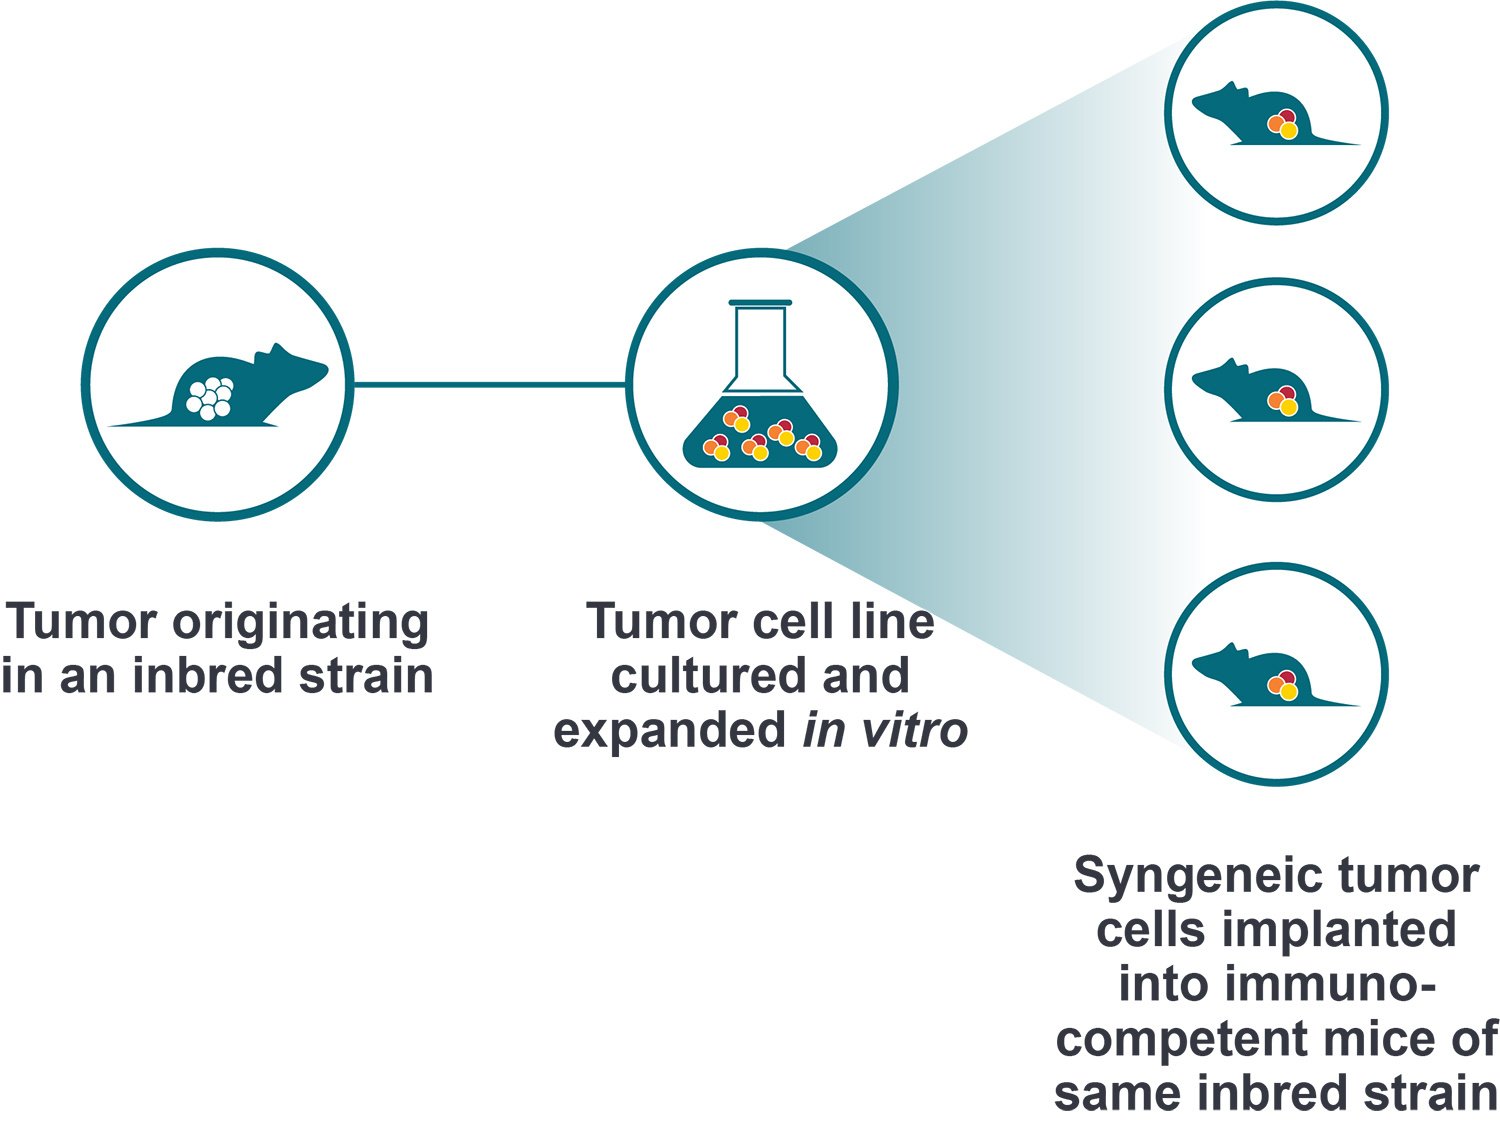 Syngeneic Tumor Mouse Models: The Pros and Cons